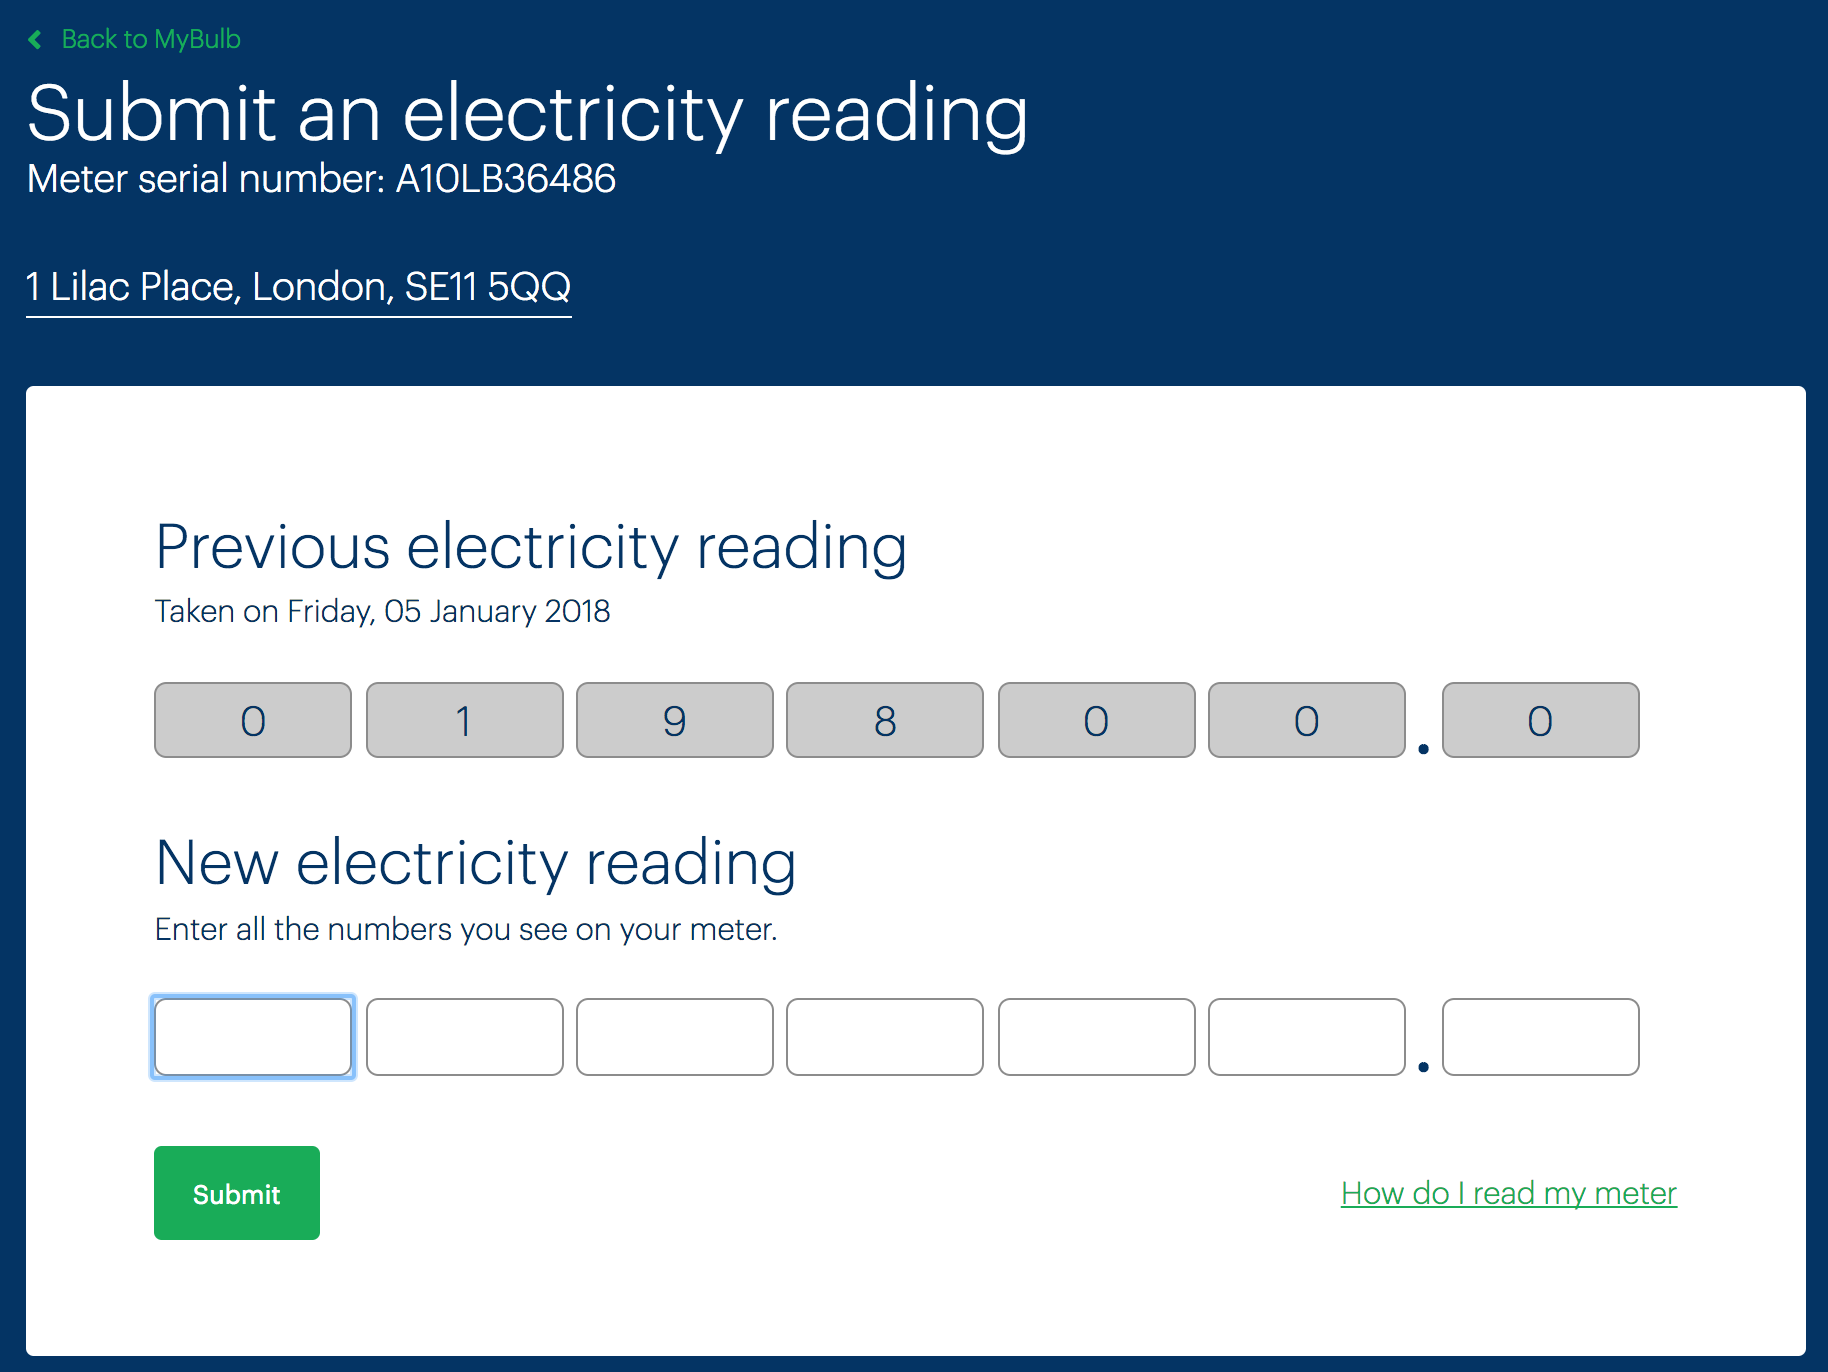 Submit an electricity reading page